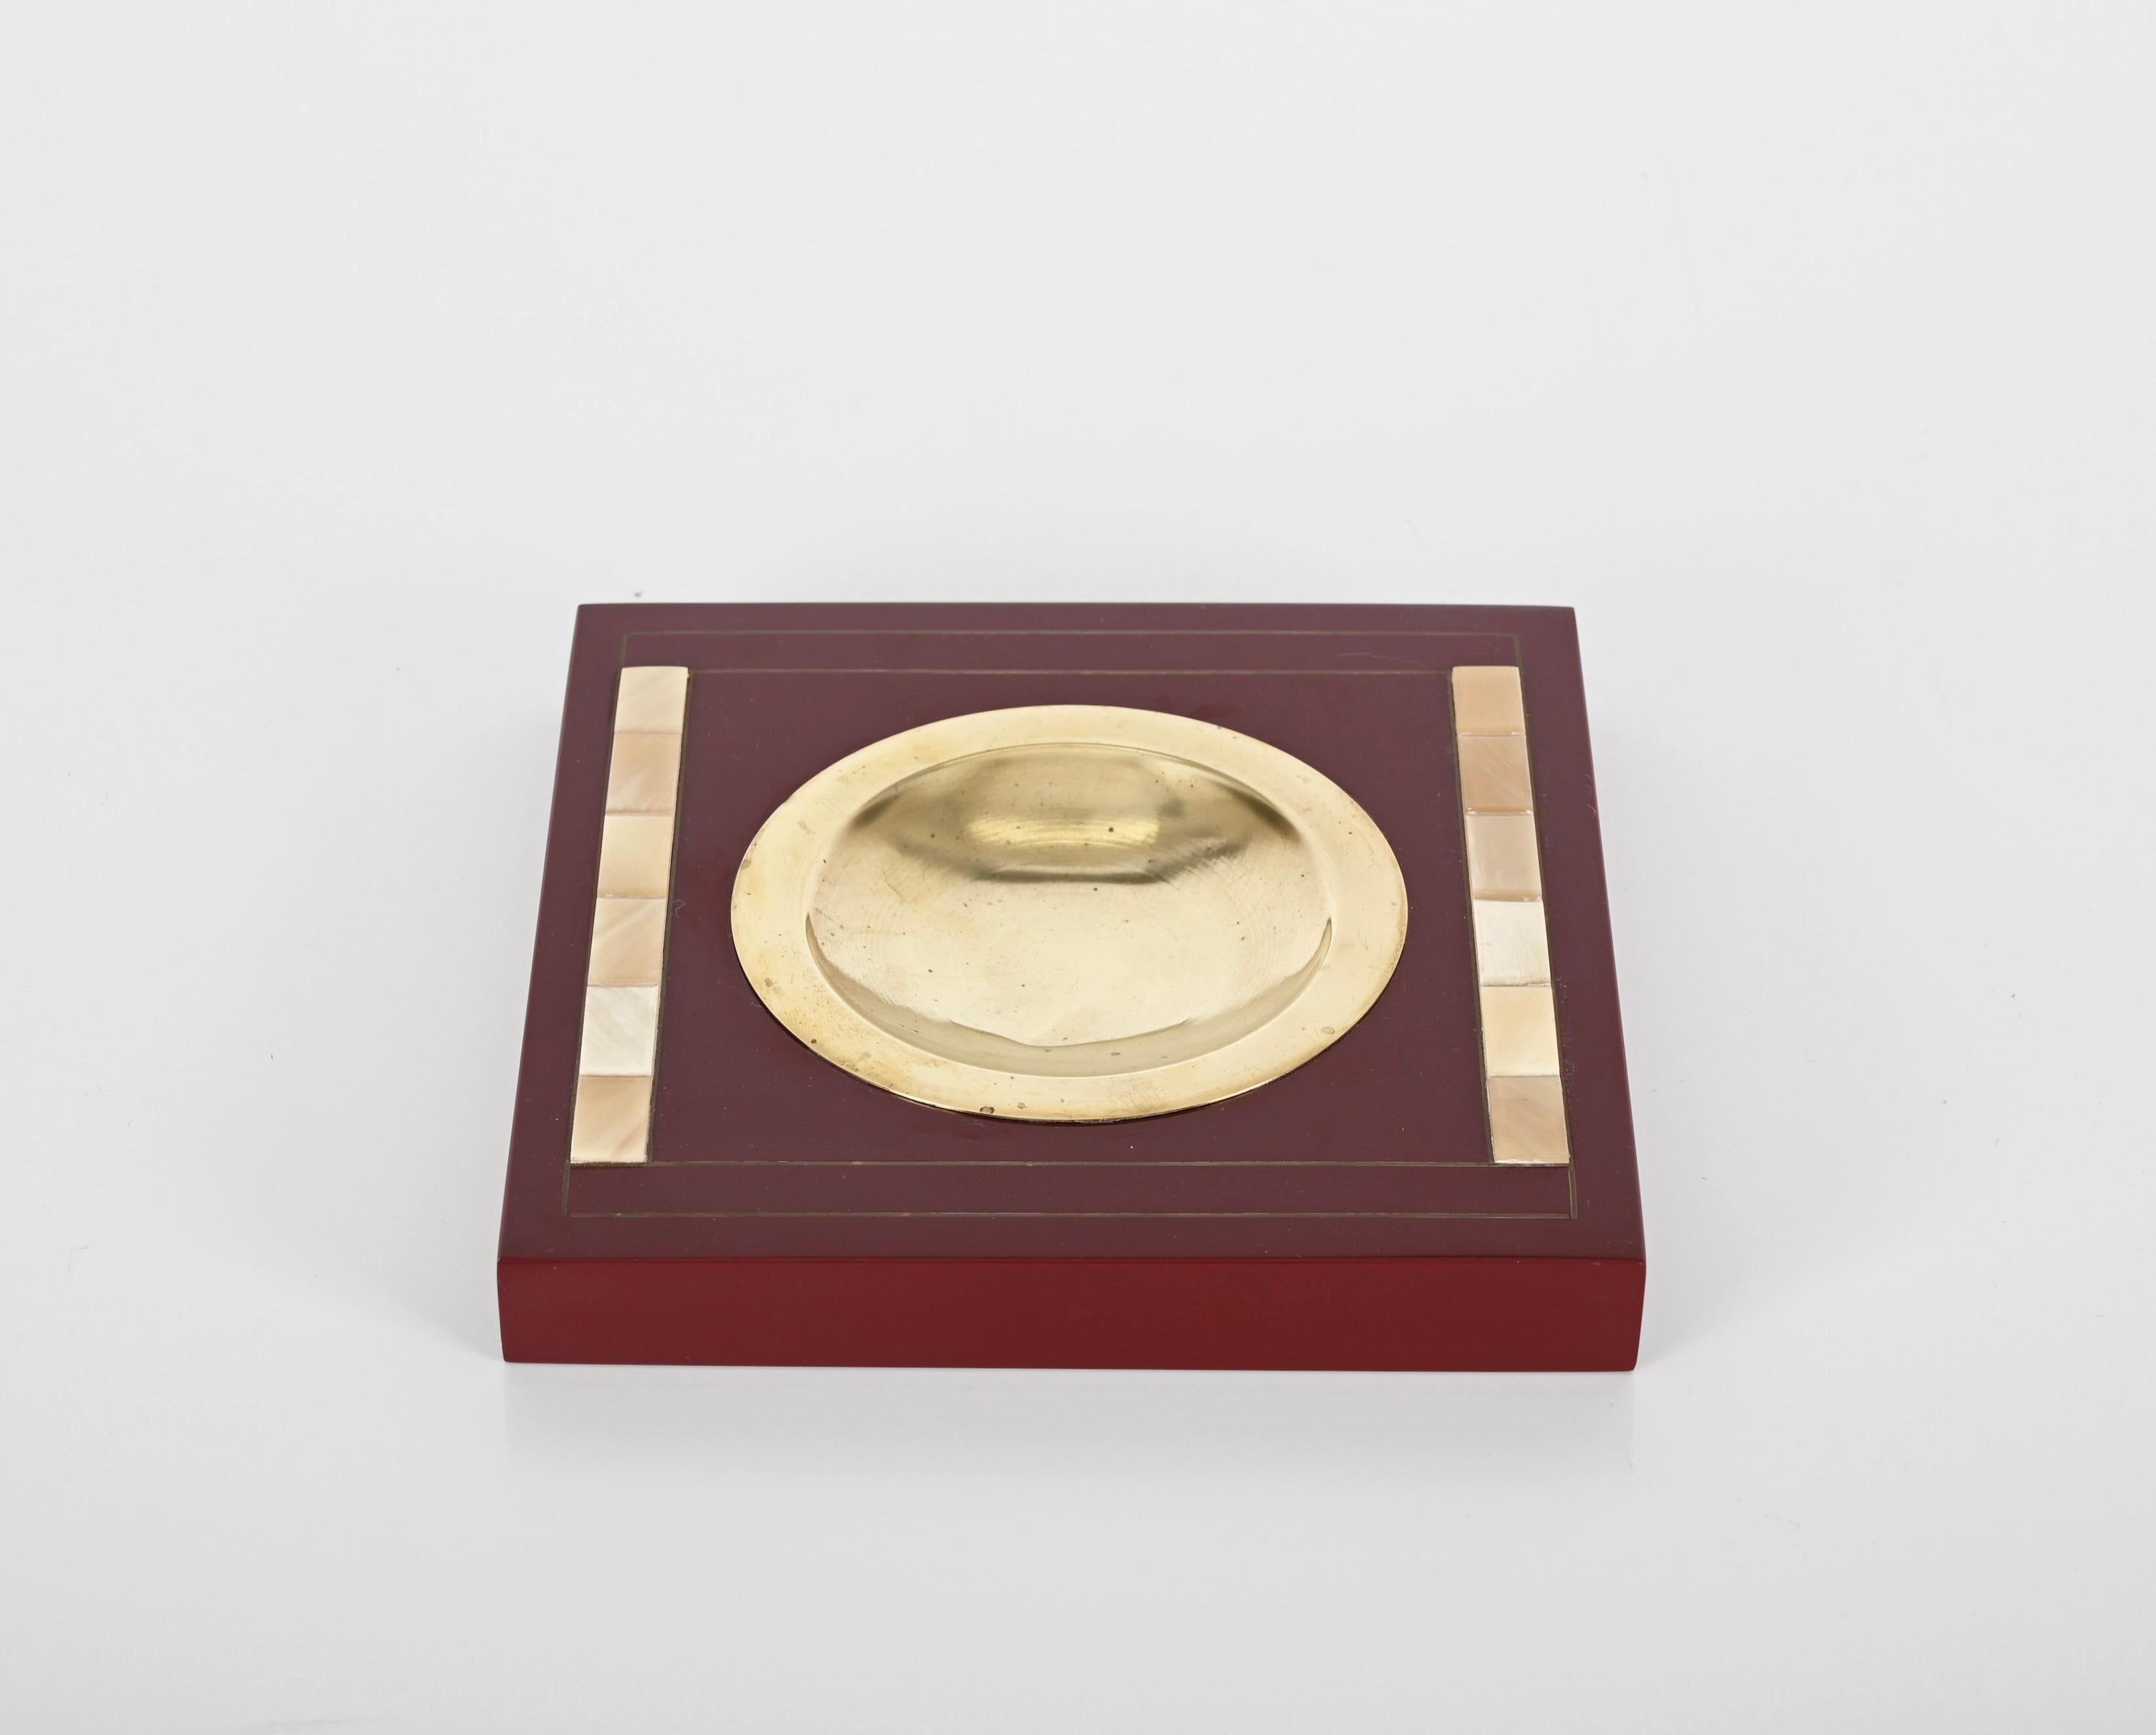 Delightful square pocket tray or ashtray made in burgundy lacquered wood, shell and brass. This incredibly elegant object is attributed to Tommaso Barbi and was made in Italy during the 1970s clearly in the style of a Dior production.

Splendid